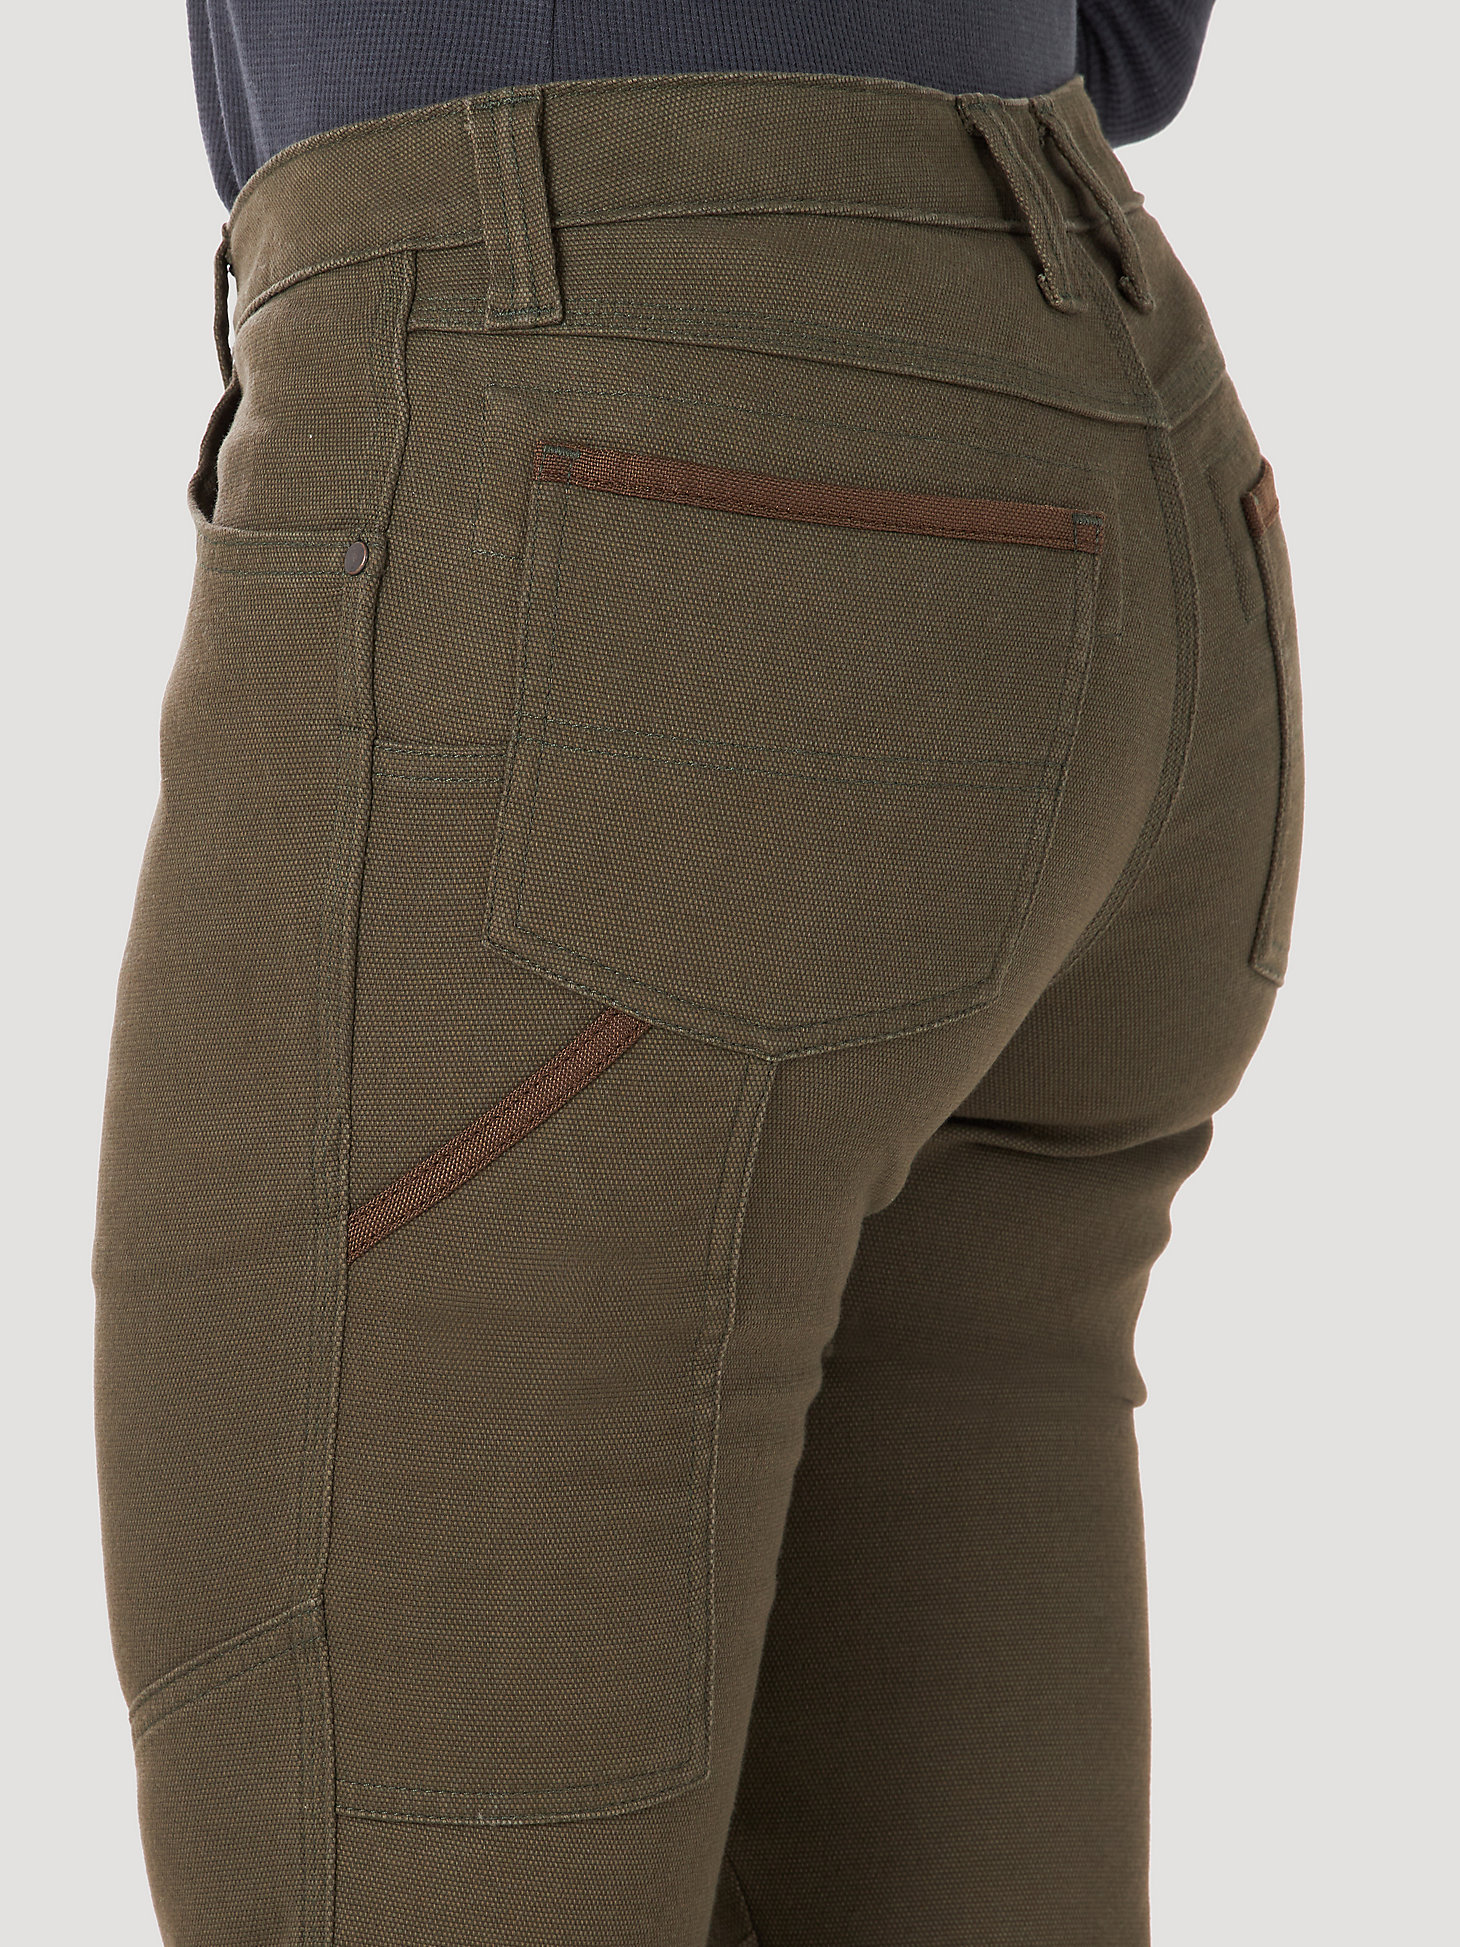 Women's Wrangler® RIGGS Workwear® Straight Fit Utility Work Pant in Loden alternative view 4